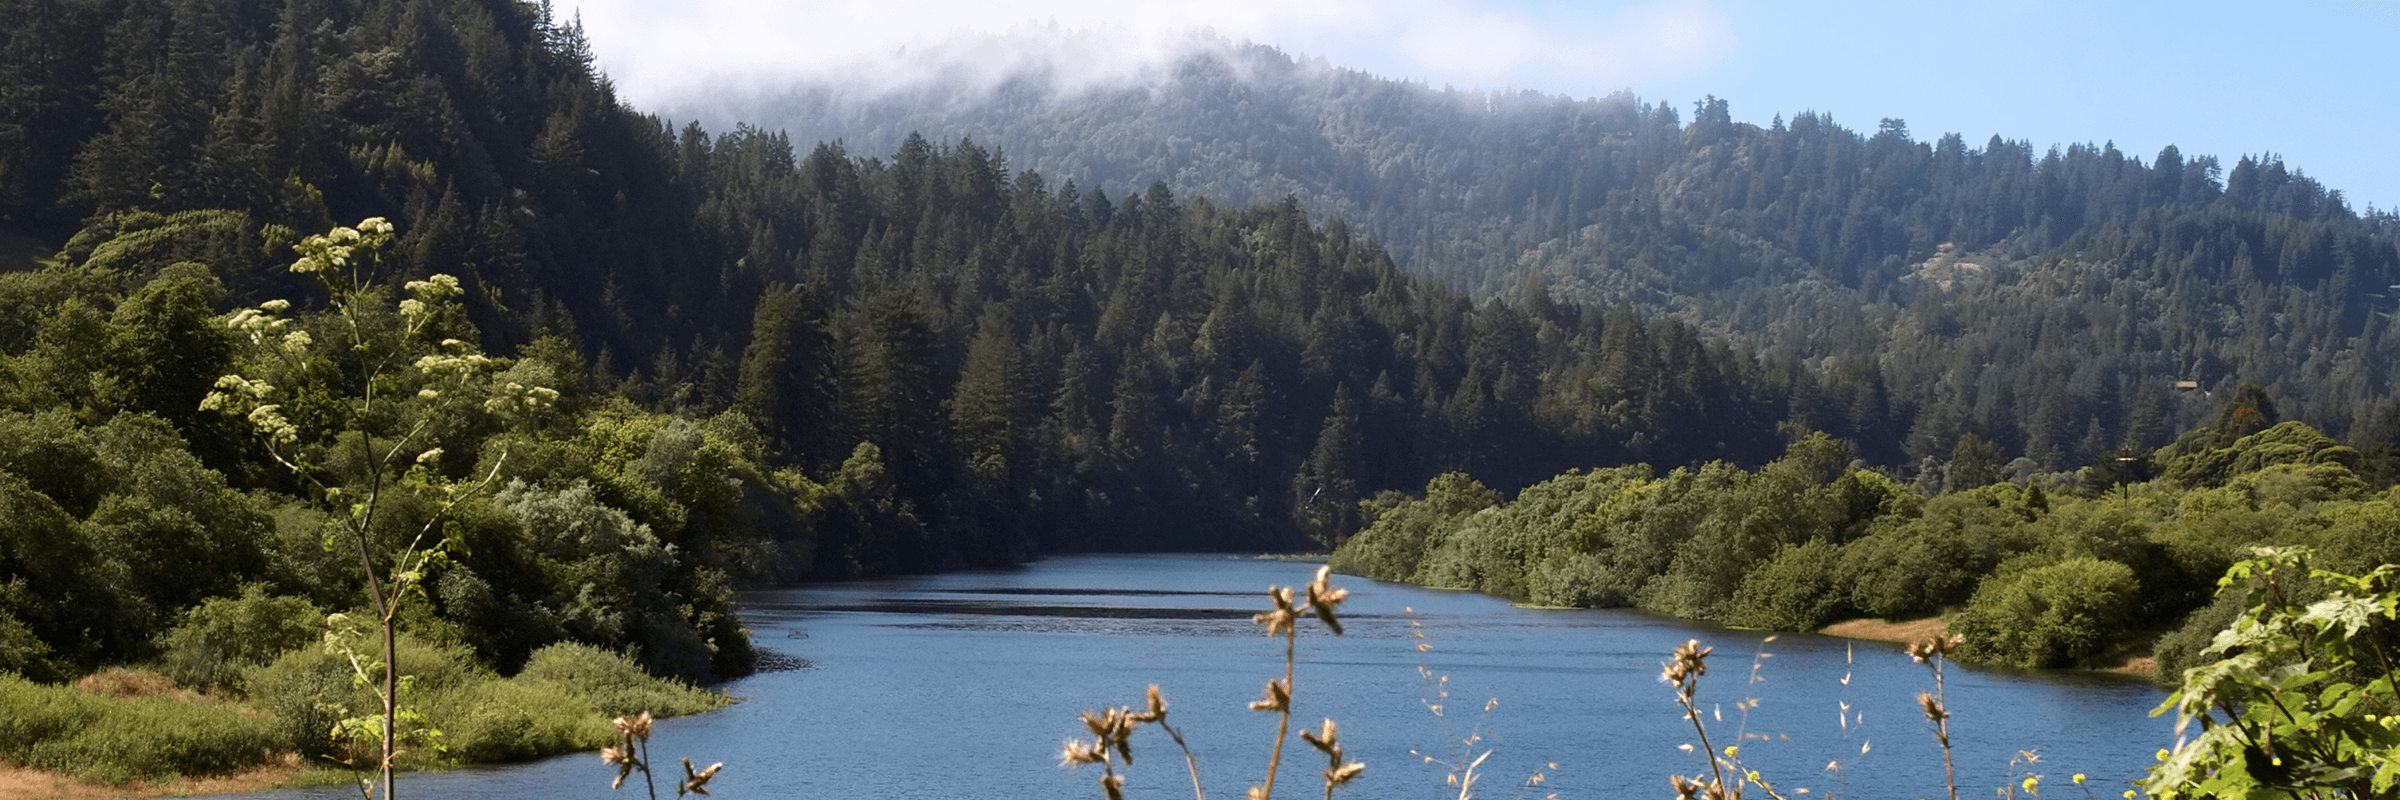 Russian River by Ingrid Taylar (Flickr CC BY 2.0)